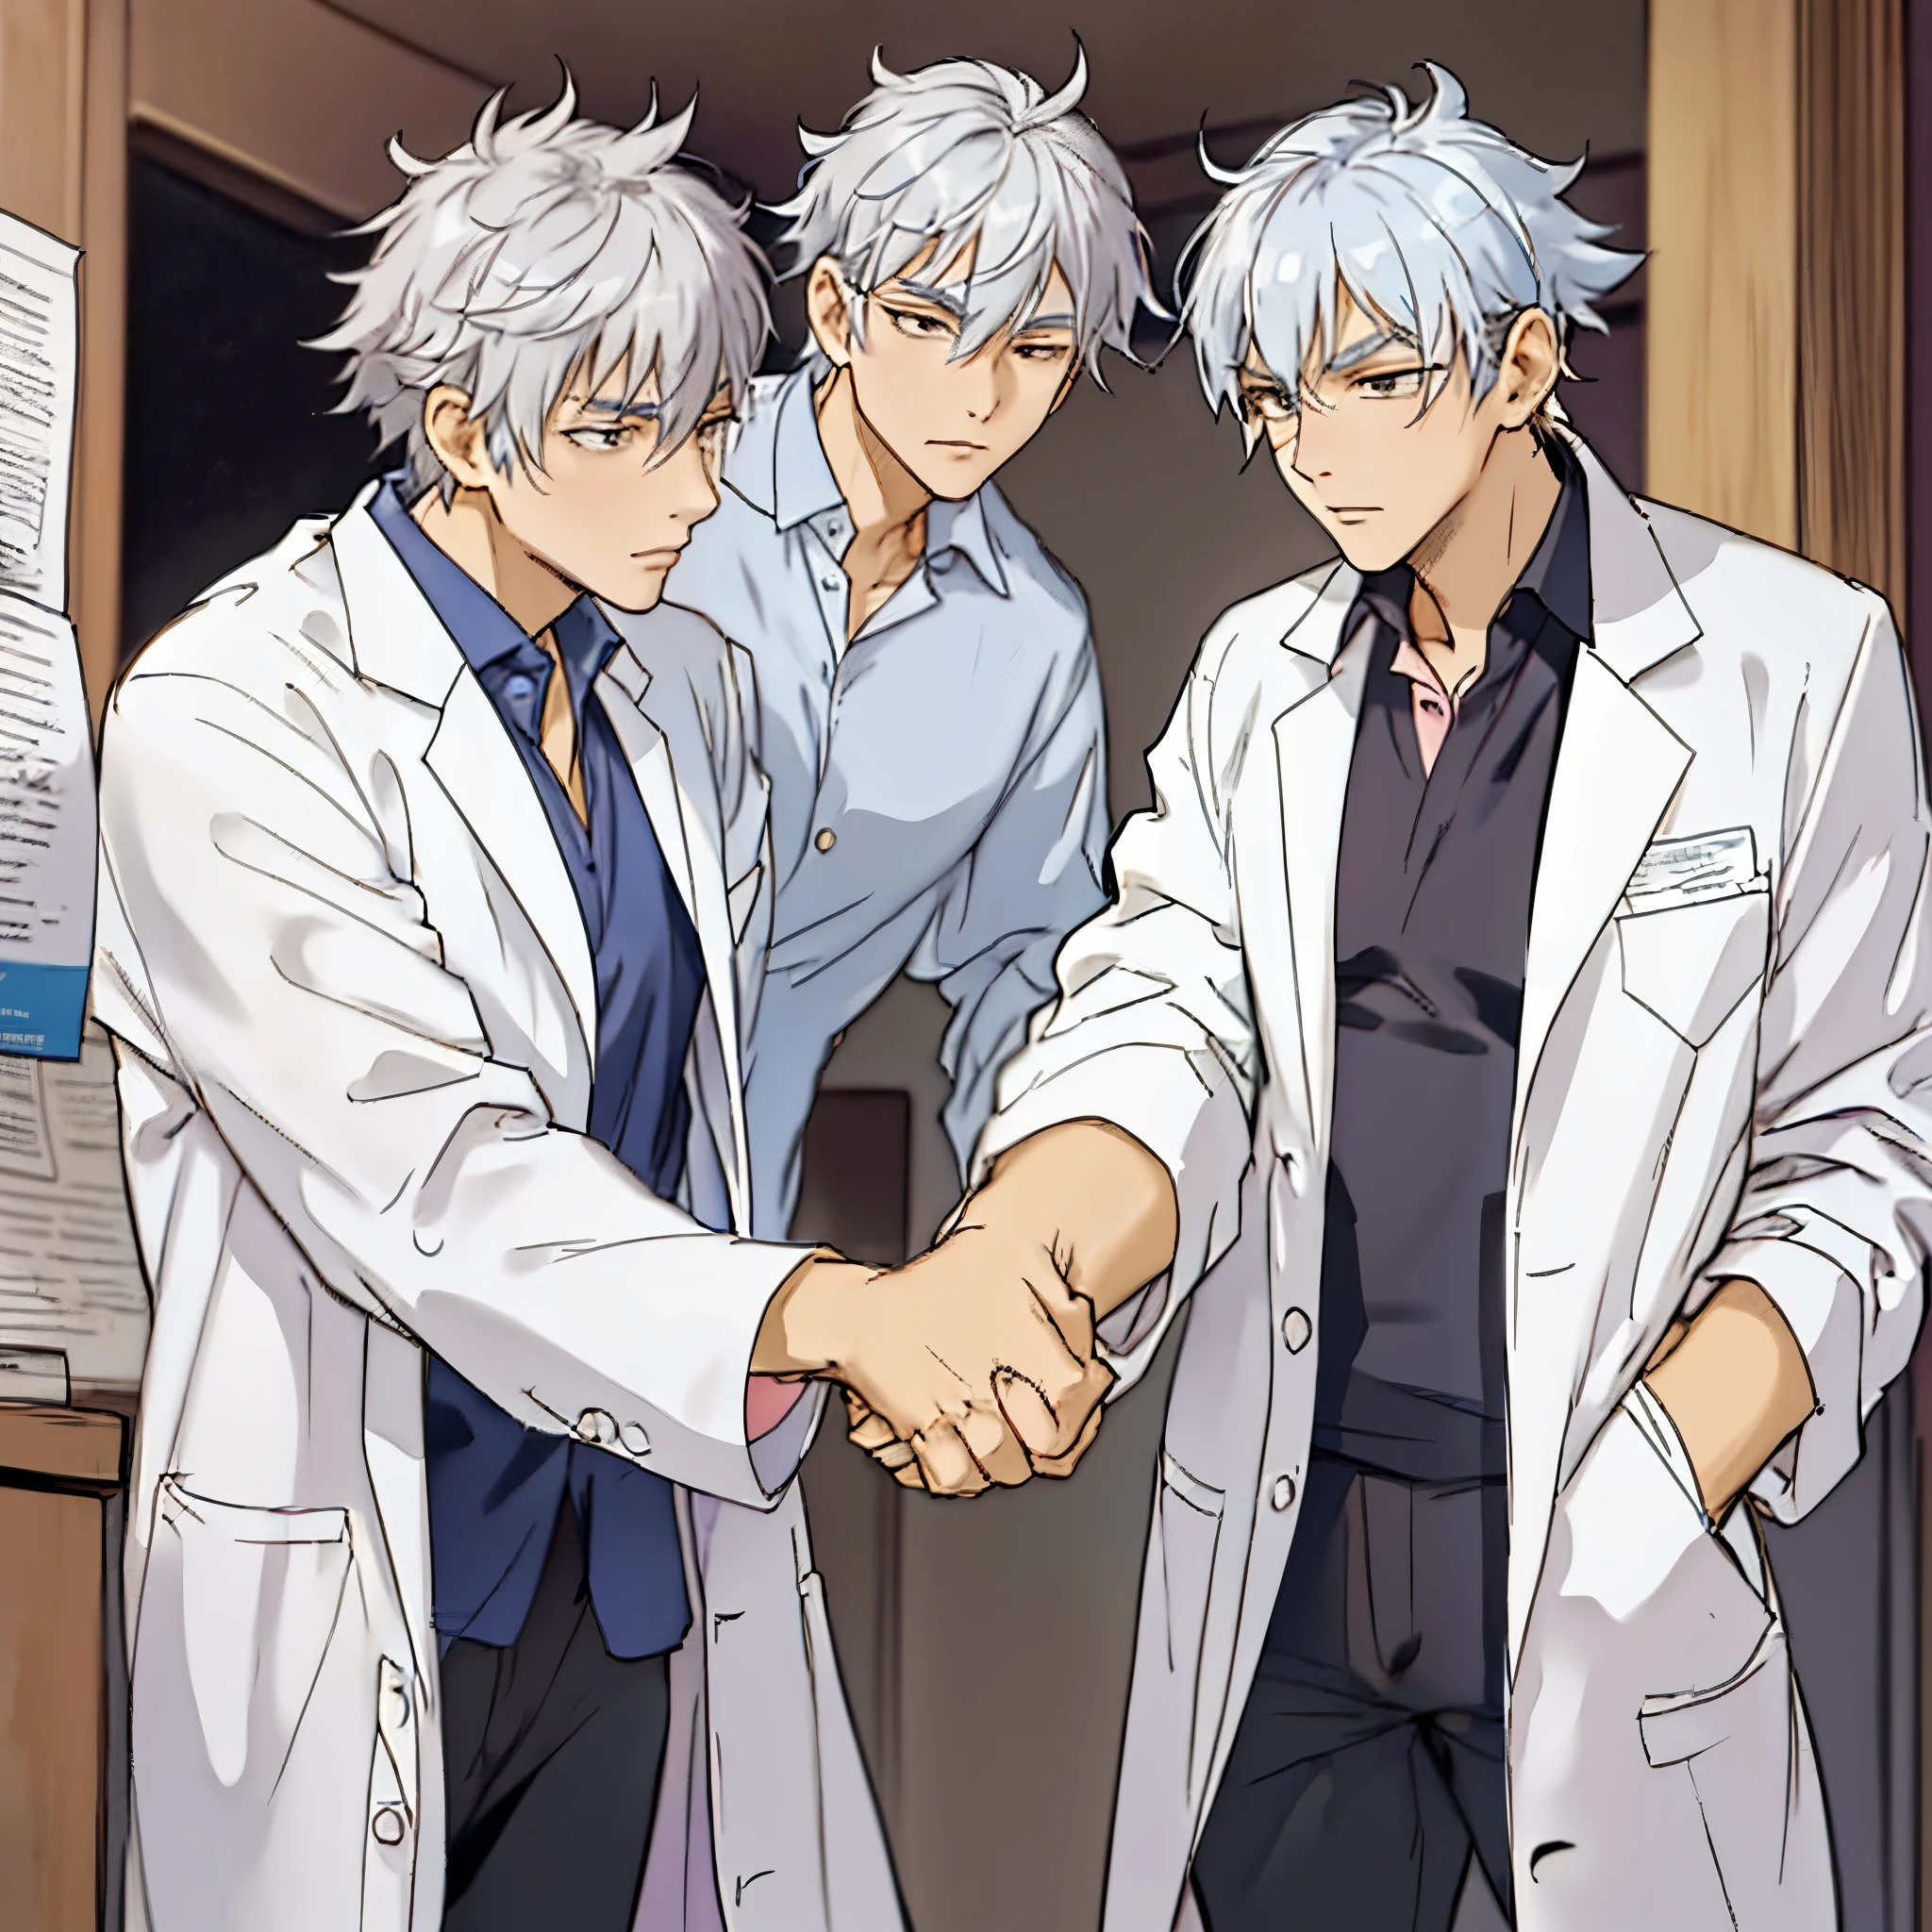 silver haired guy giving a paper to another man, he is stretching his arm to hand a paper to someone else, he is wearing a lab coat